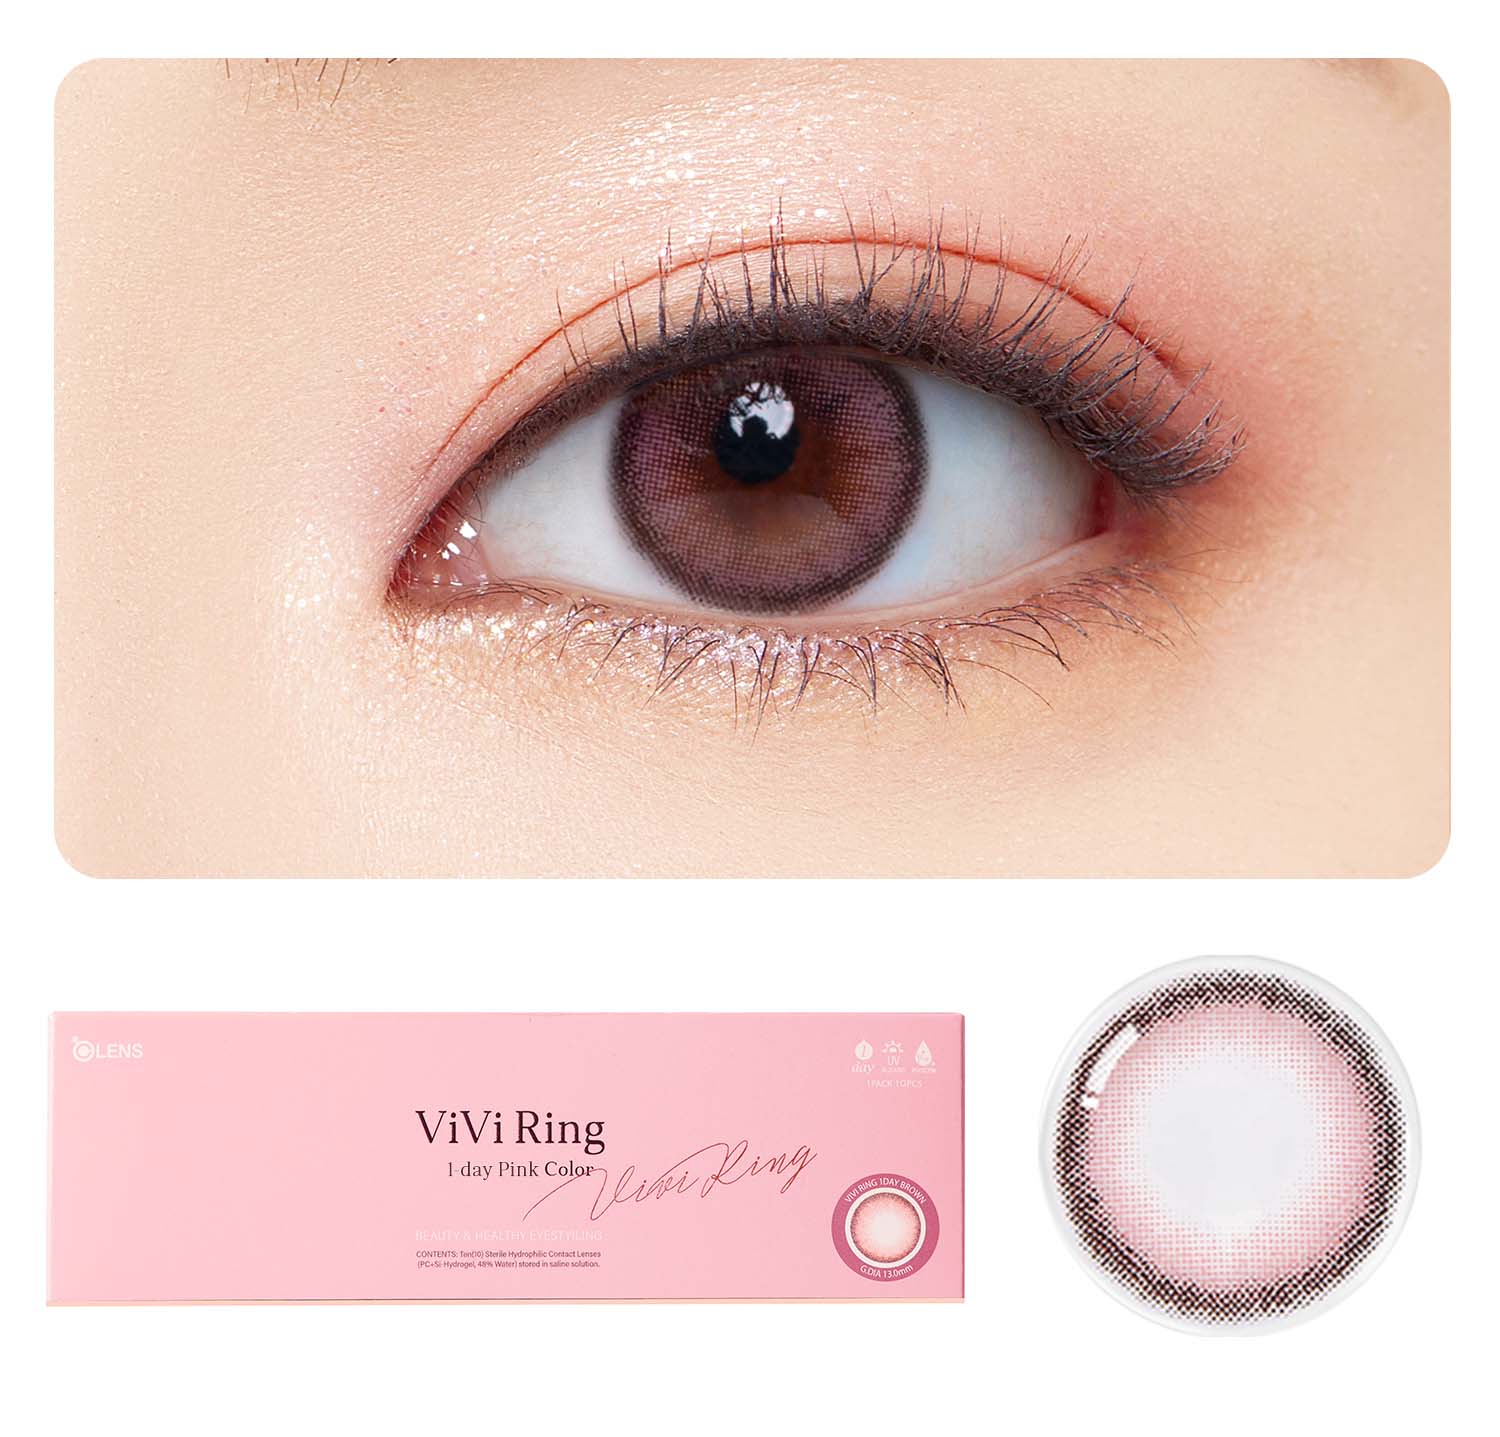 OLENS Premium Color Contact Lens | Vivi ring Pink Color Contact Lens | 1 day disposable trial pack | o-lens.co.in